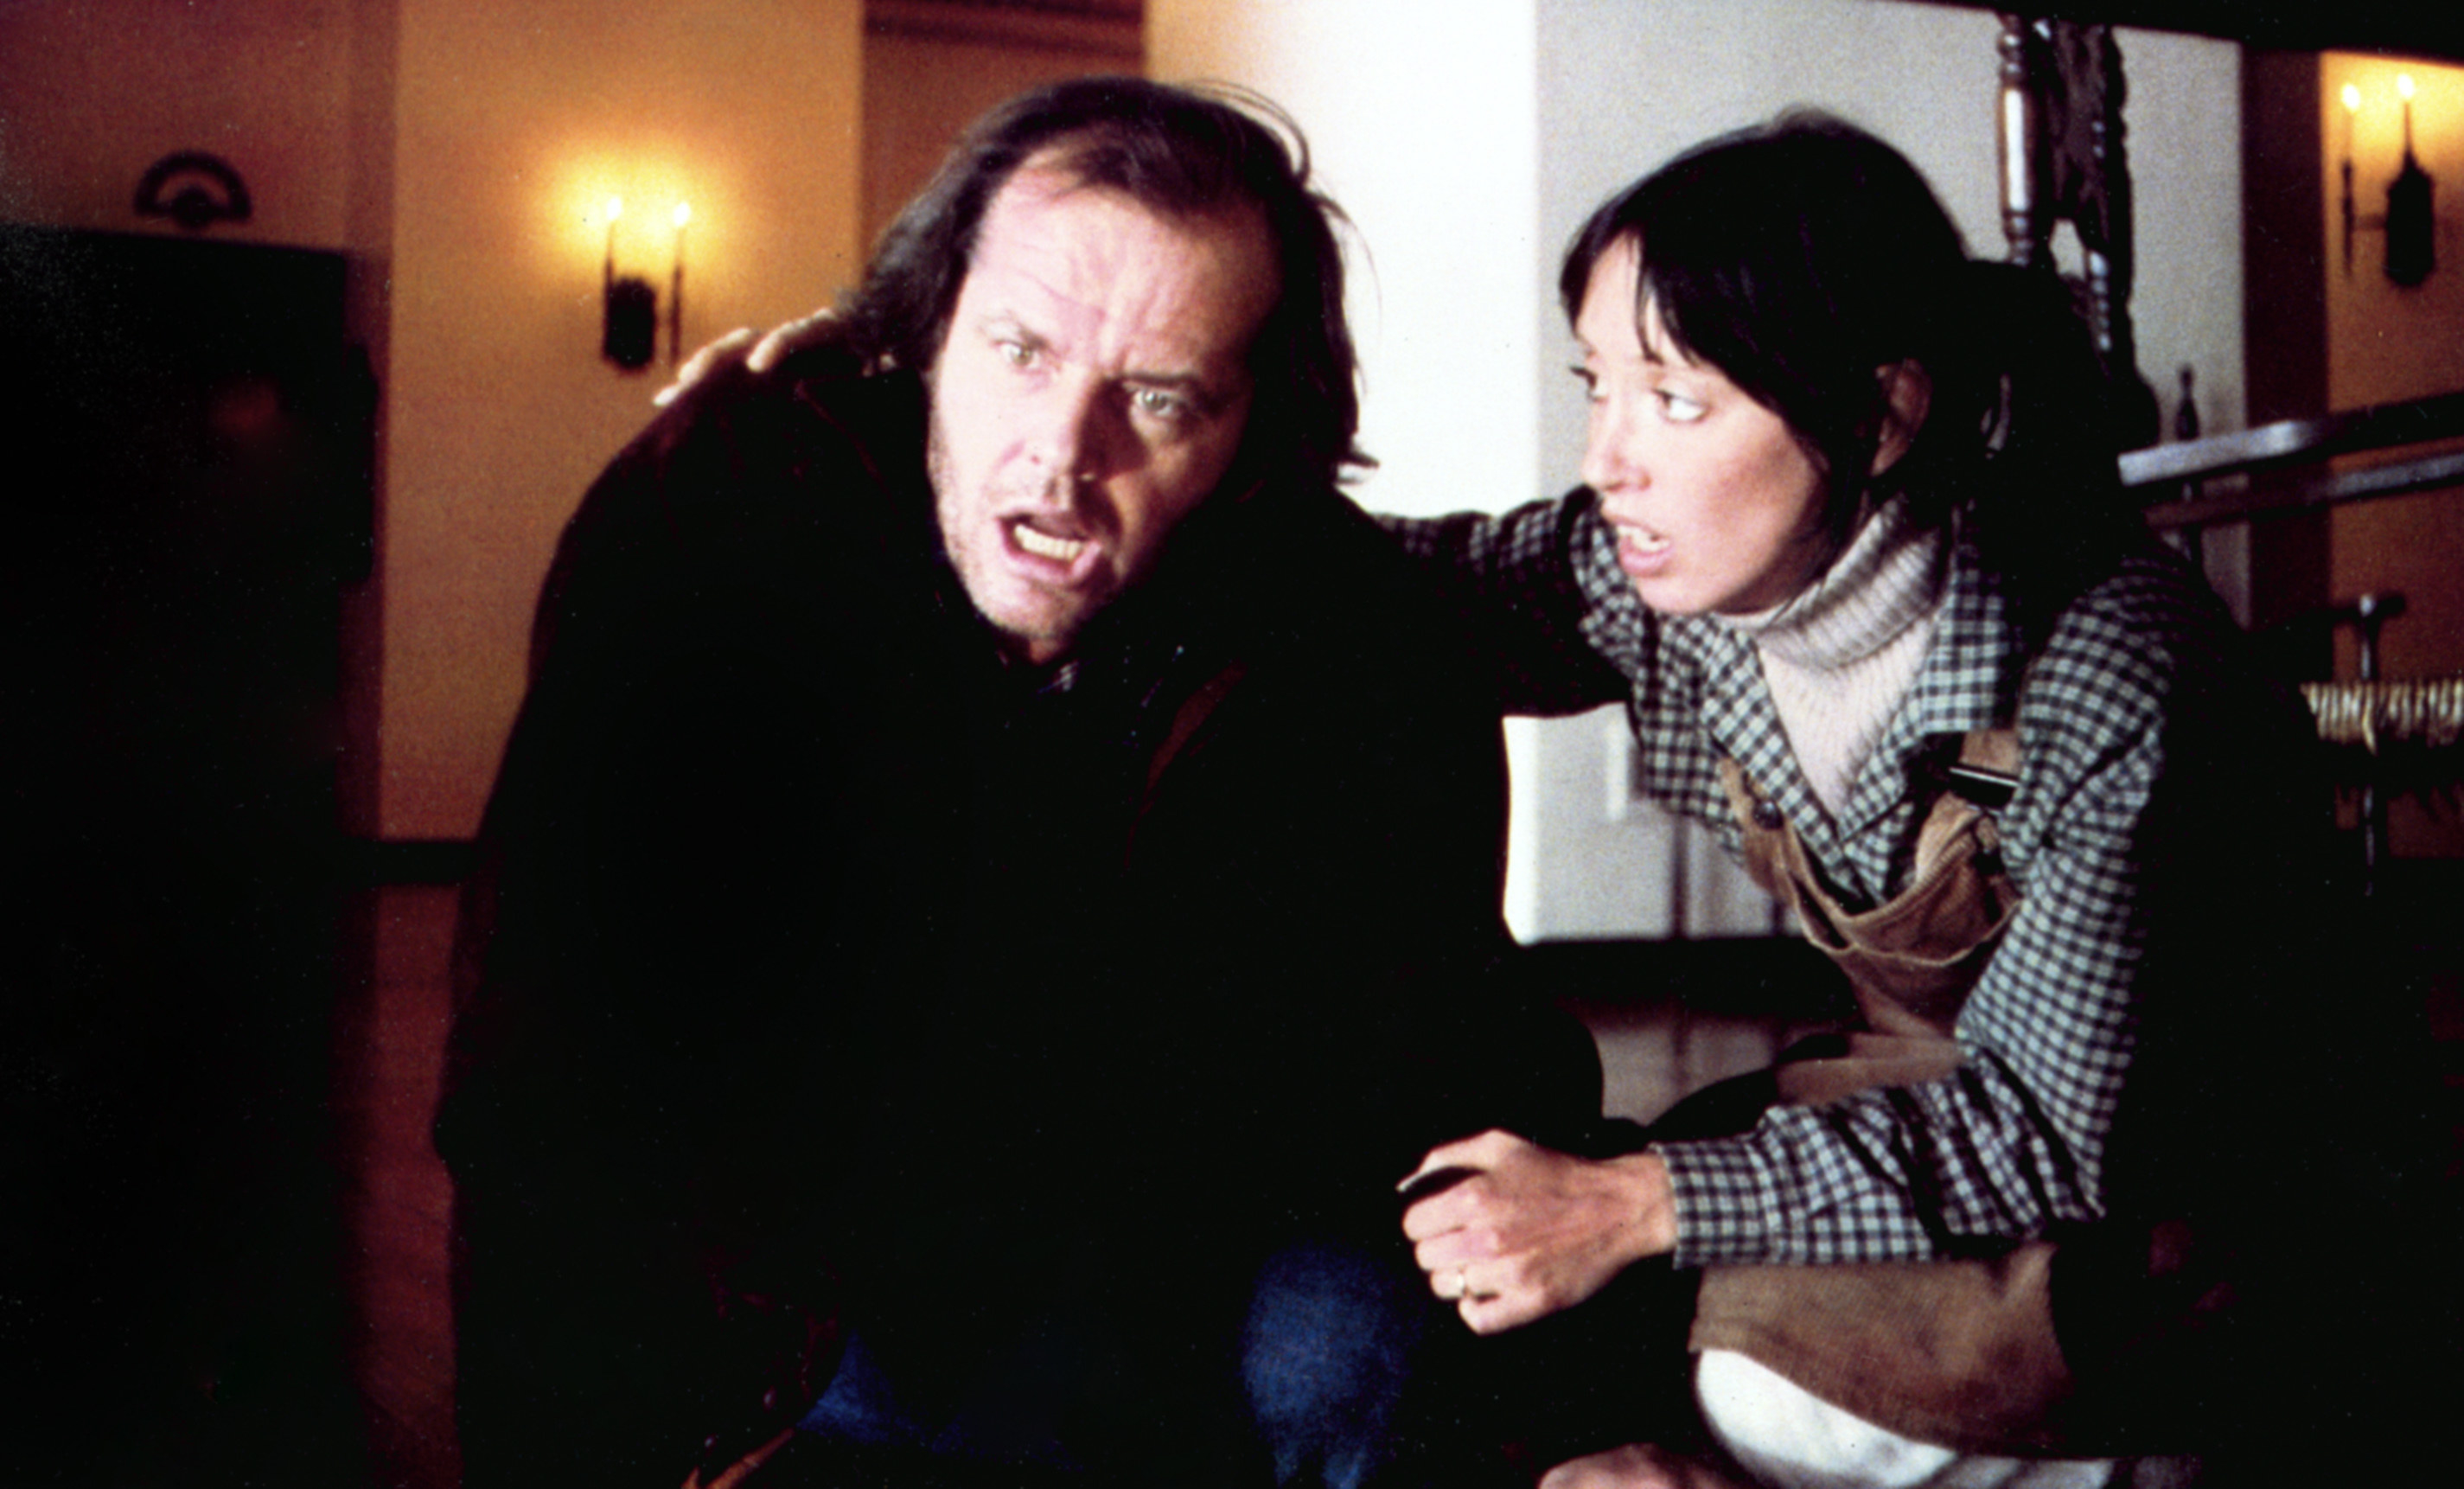 Jack and Shelley in a scene from The Shining